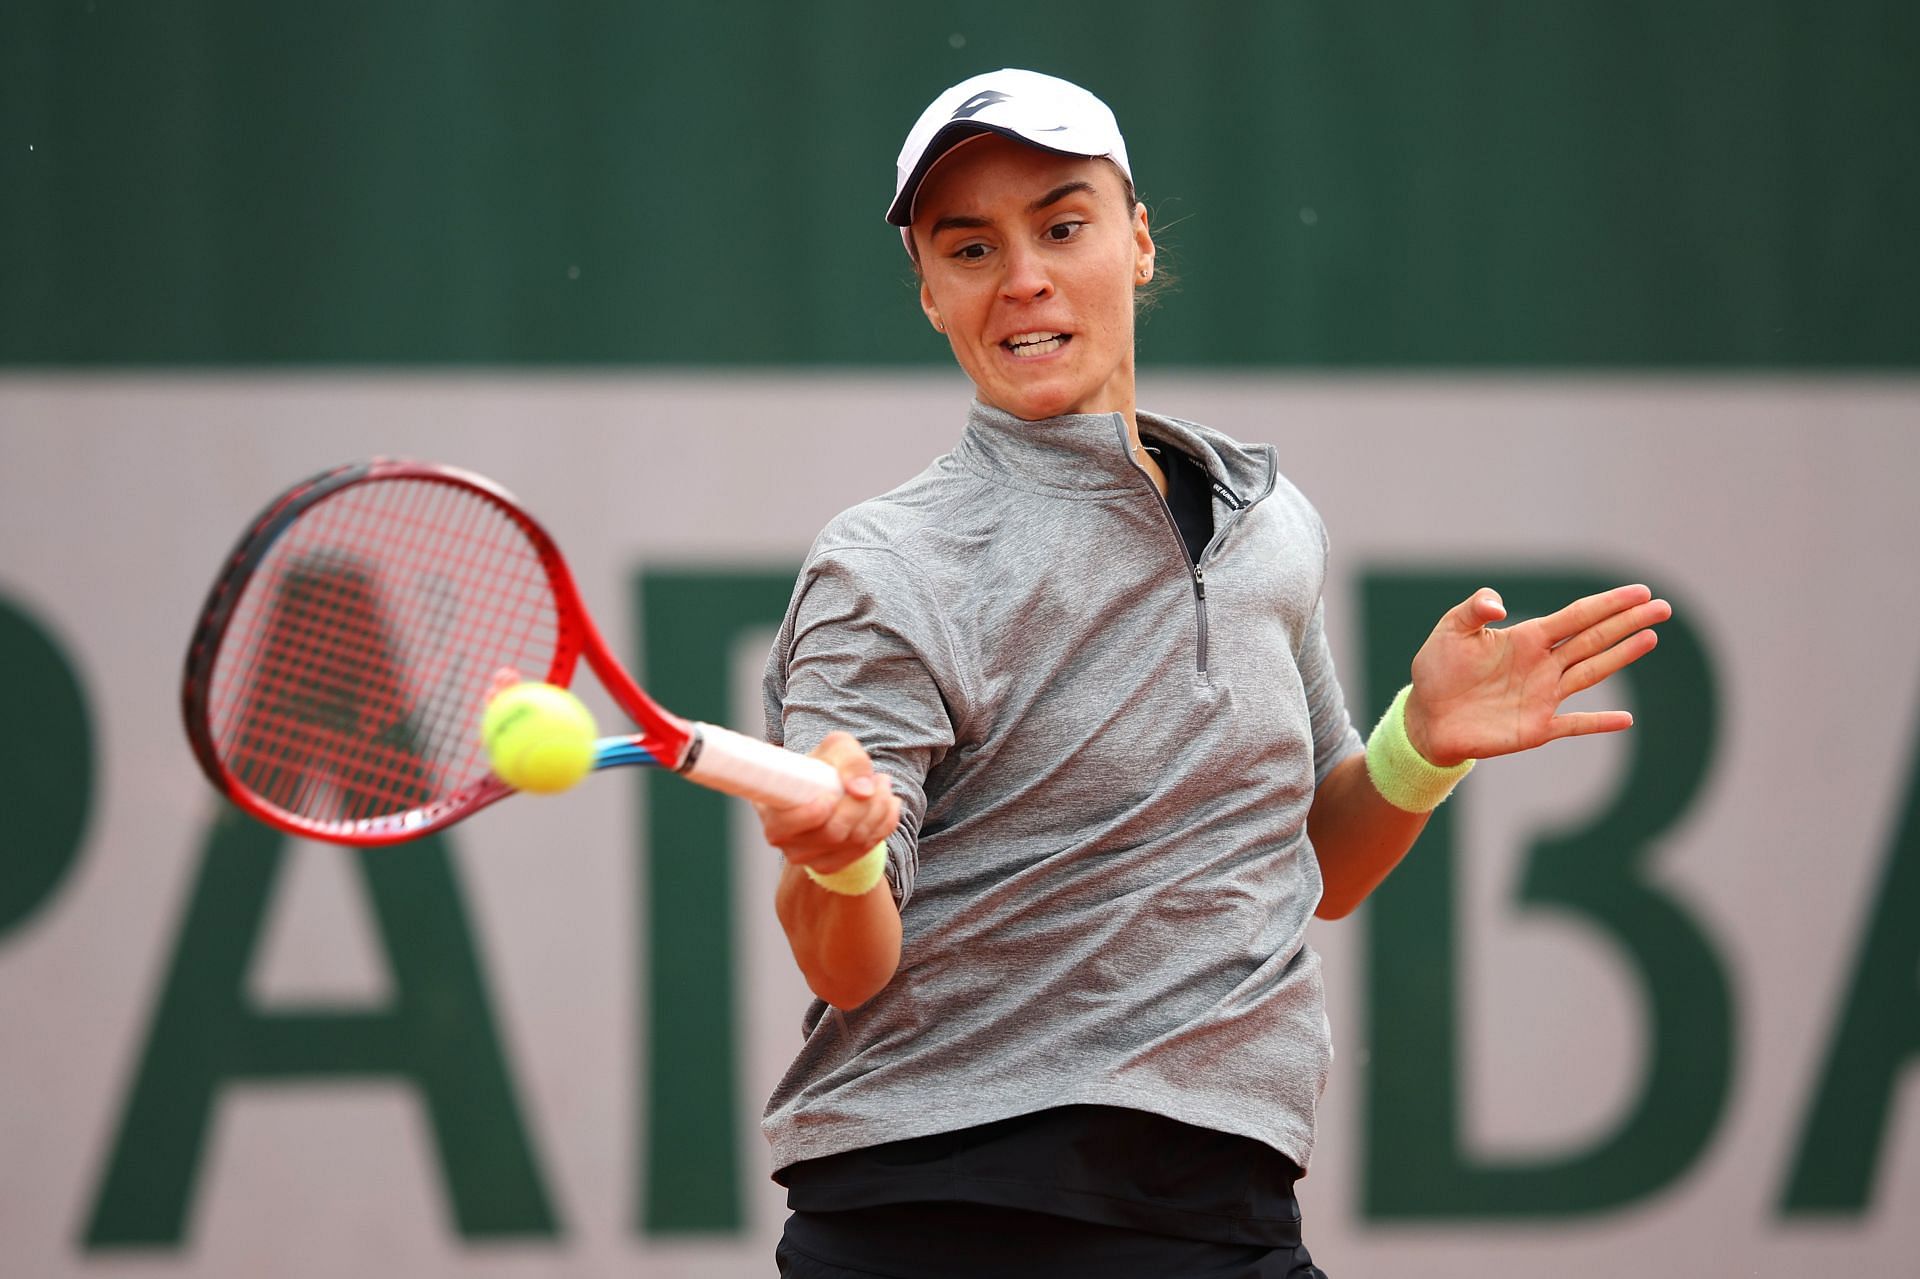 Anhelina Kalinina in action at the 2022 French Open